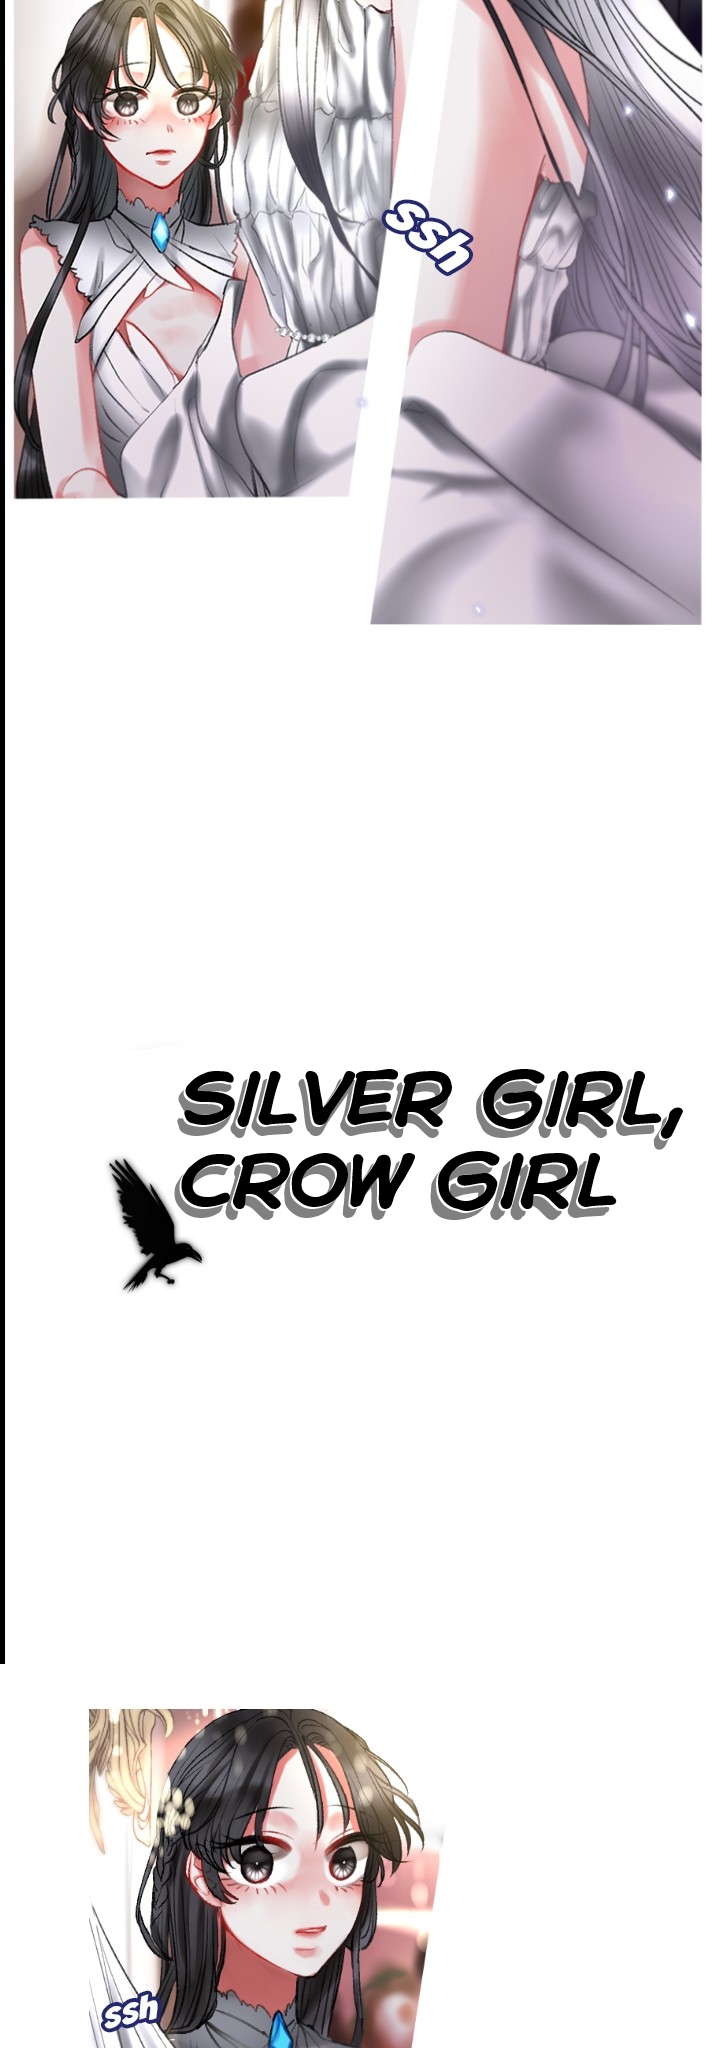 Silver Girl, Crow Girl Ch. 1 Competition at the Debutante Ball